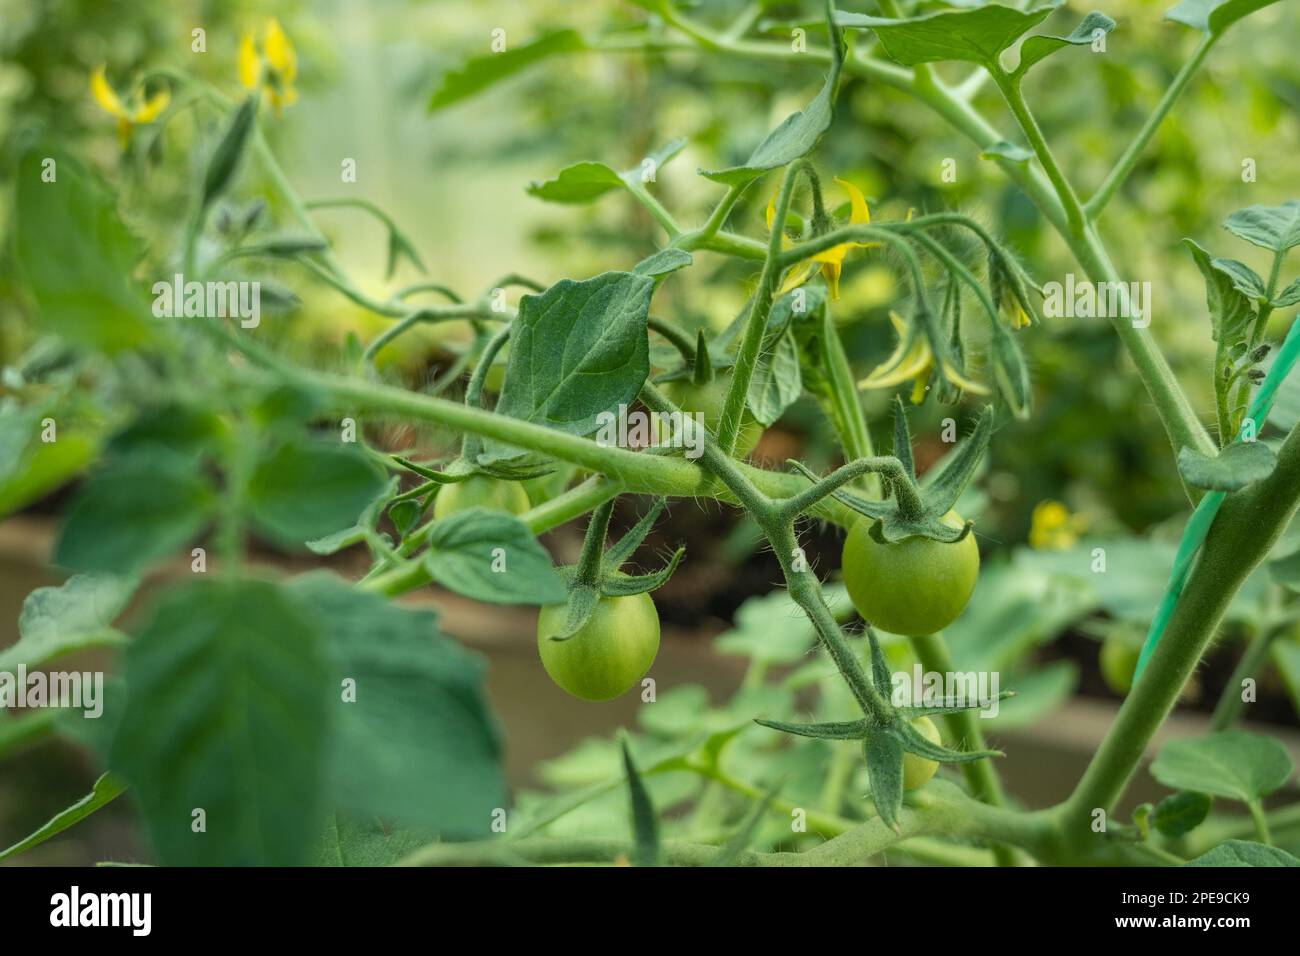 Tomato plants in greenhouse Green tomatoes flowers. Organic farming, young tomato plants Stock Photo